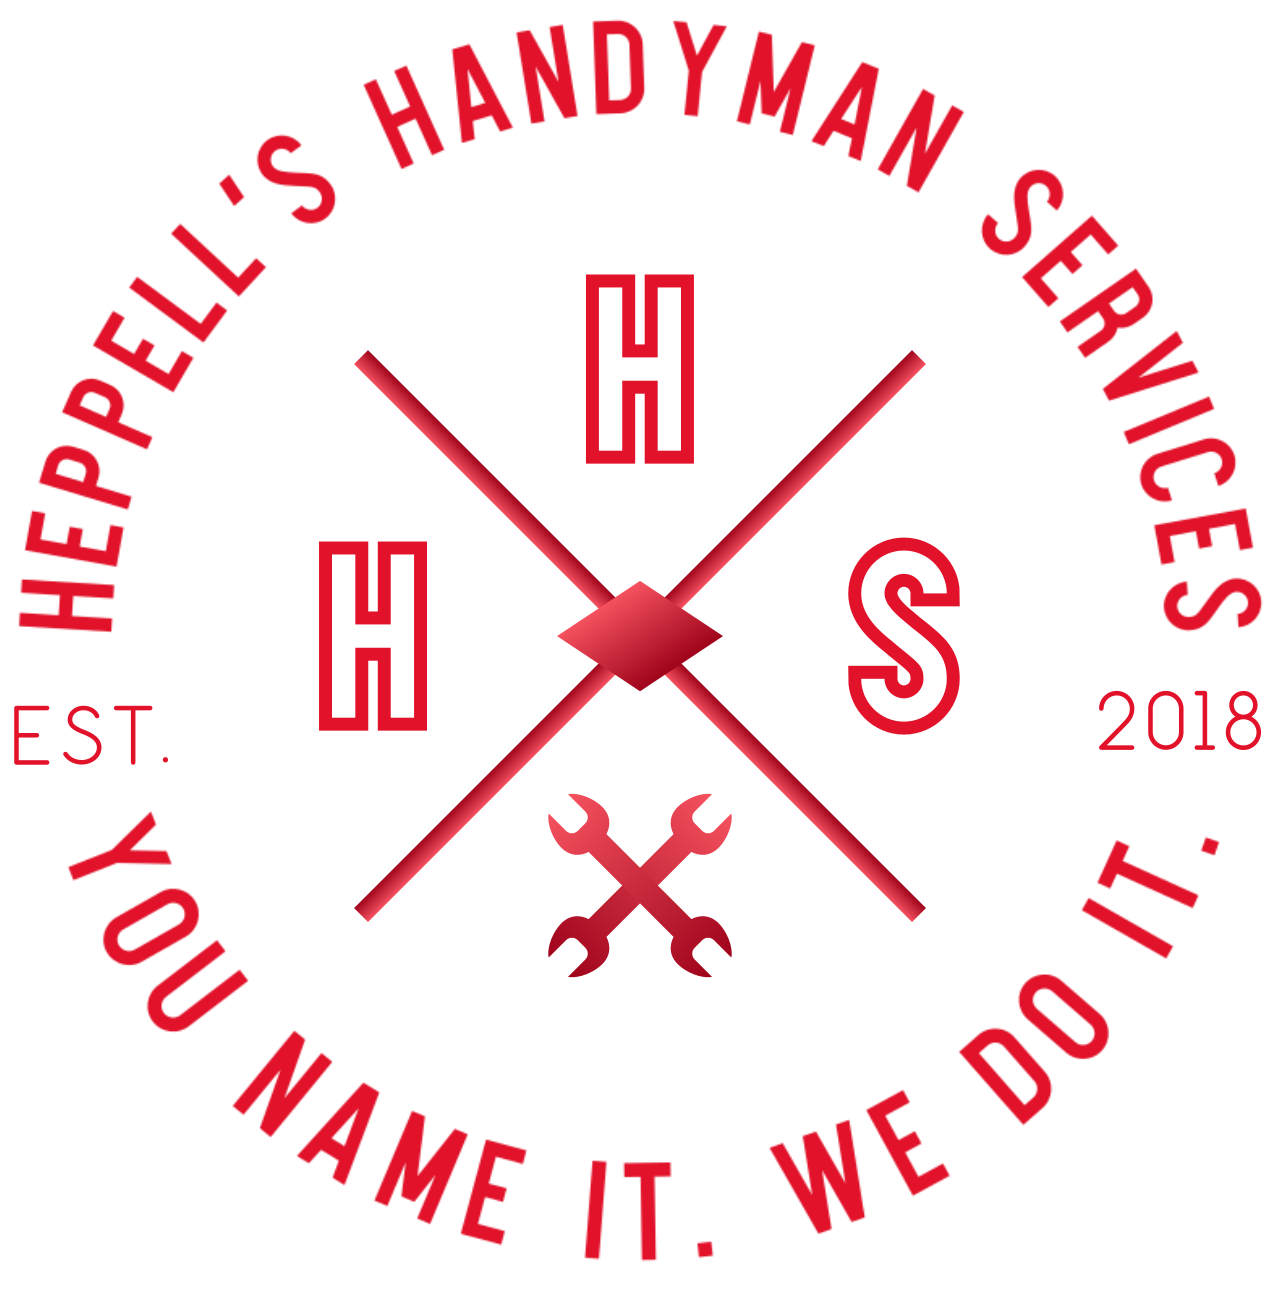 Heppell's Handyman Services's web page